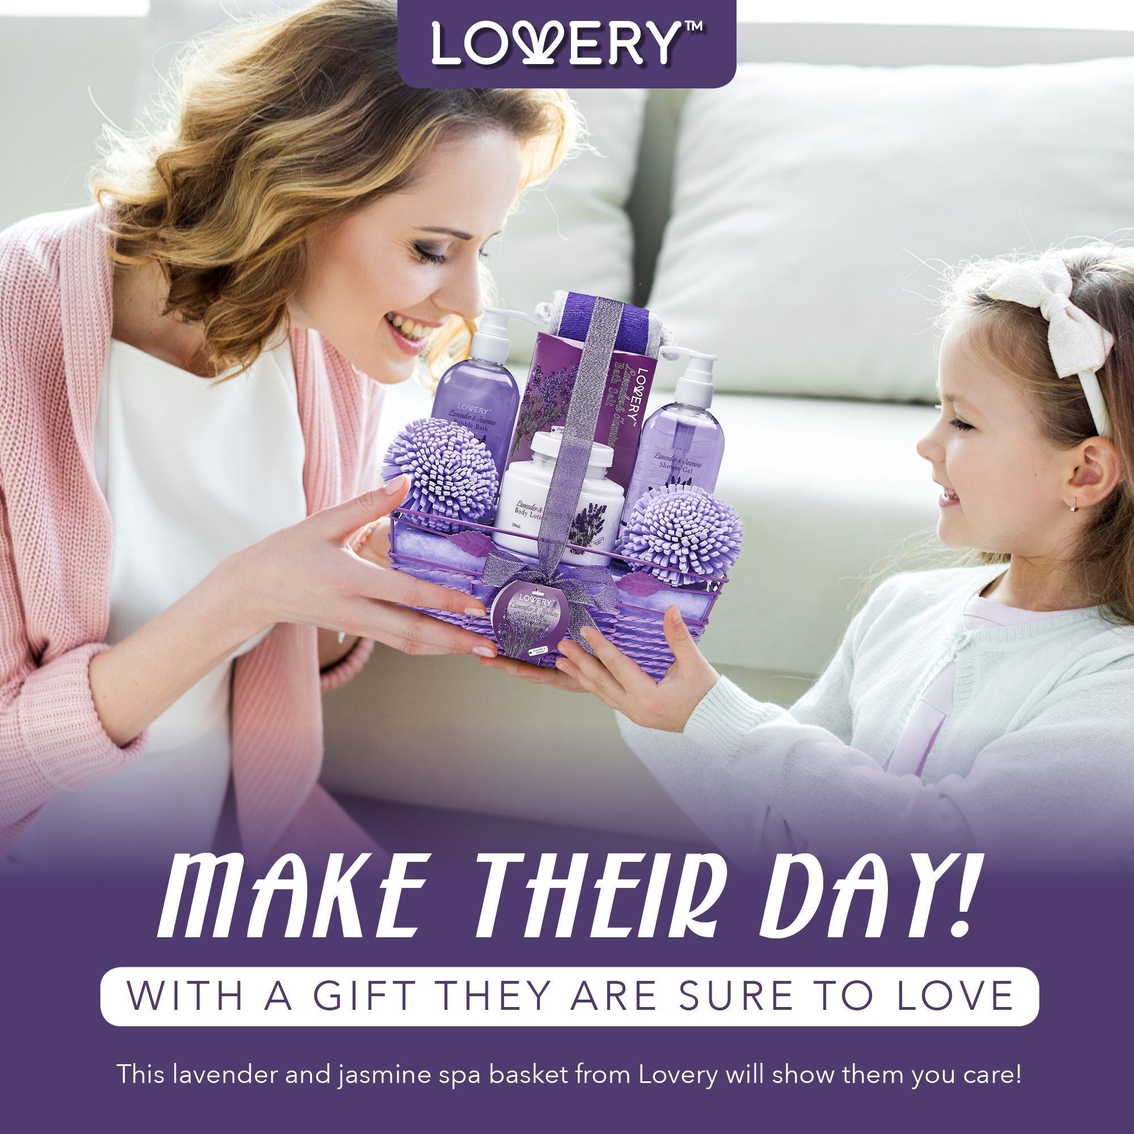 Lovery Home Spa Gift Baskets - Lavender & Jasmine Home Spa - 8pc Set - Image 5 of 5